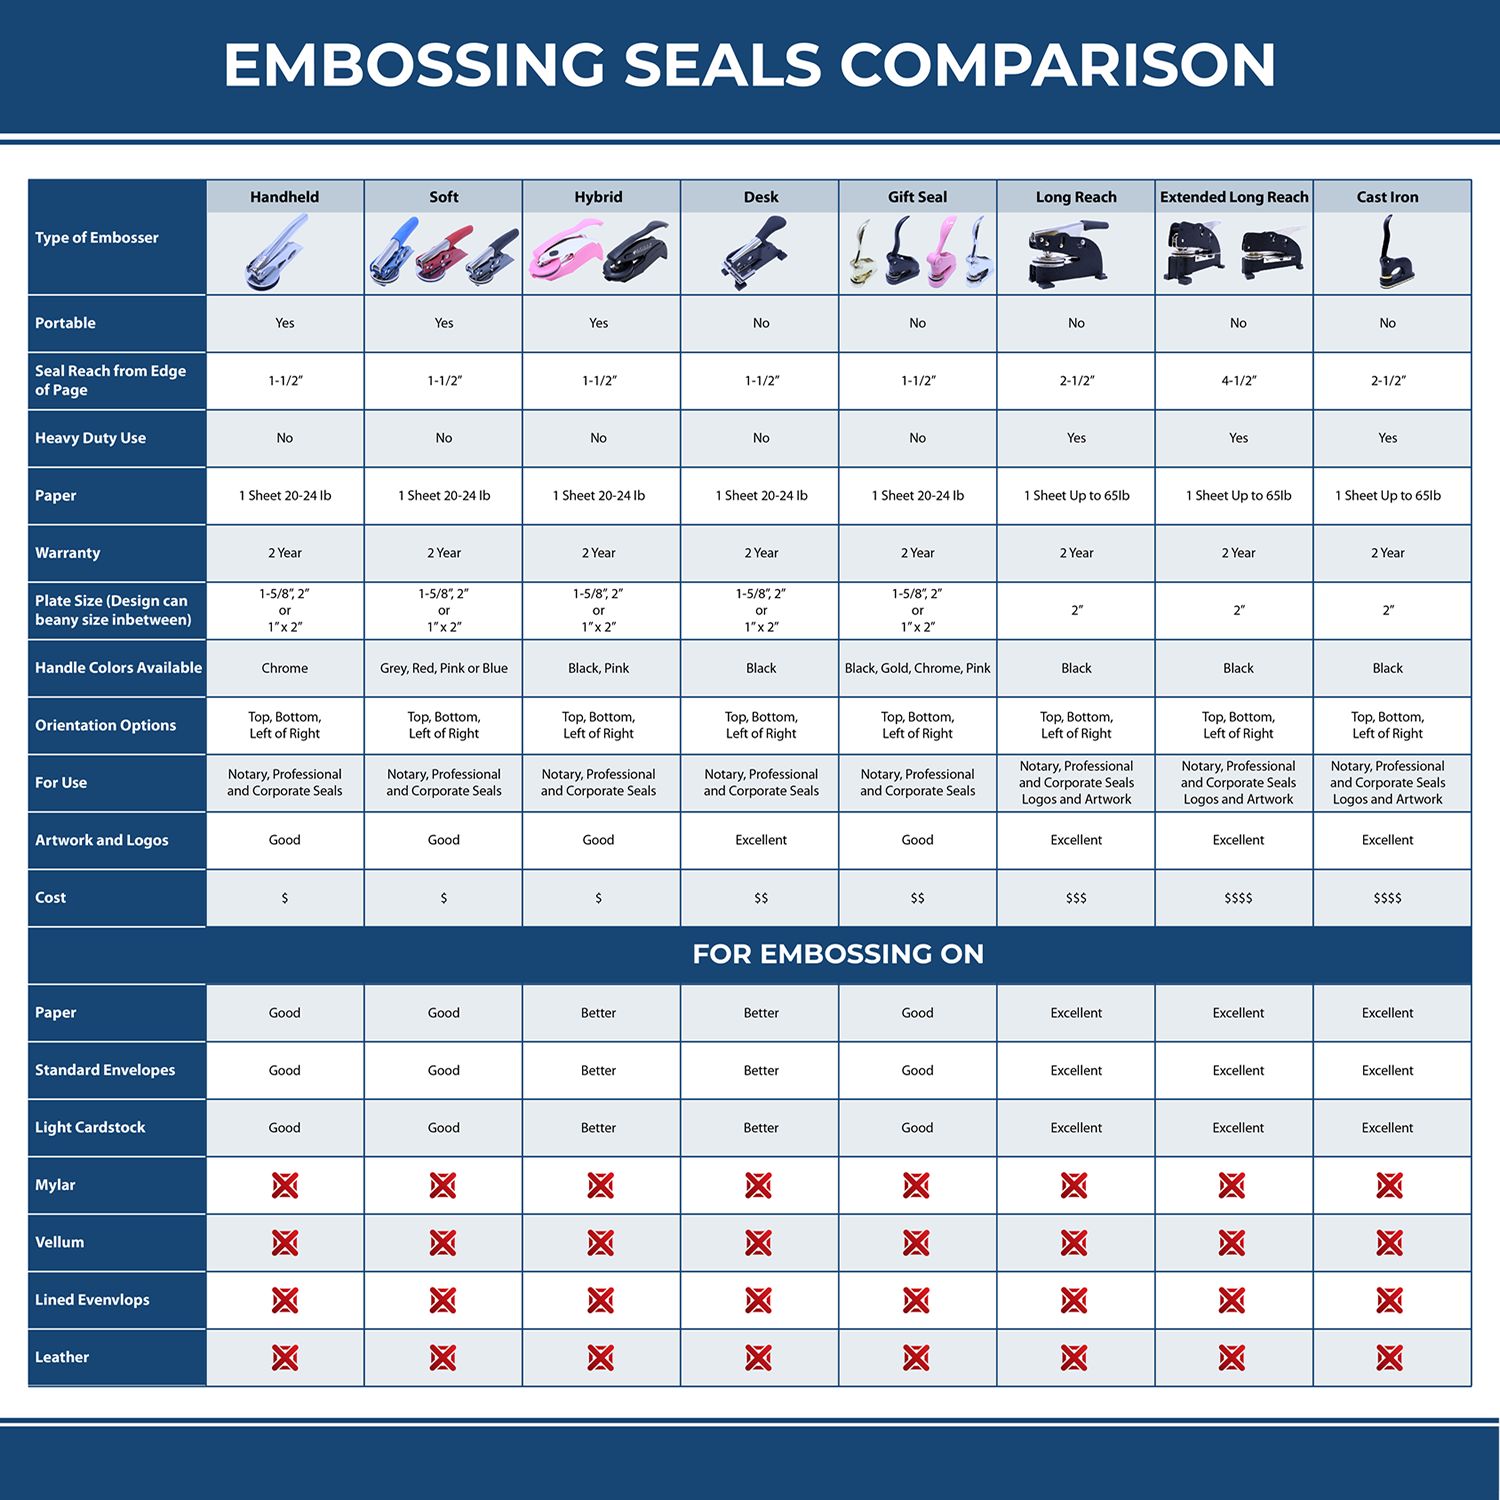 A comparison chart for the different types of mount models available for the Handheld Oregon Professional Engineer Embosser.